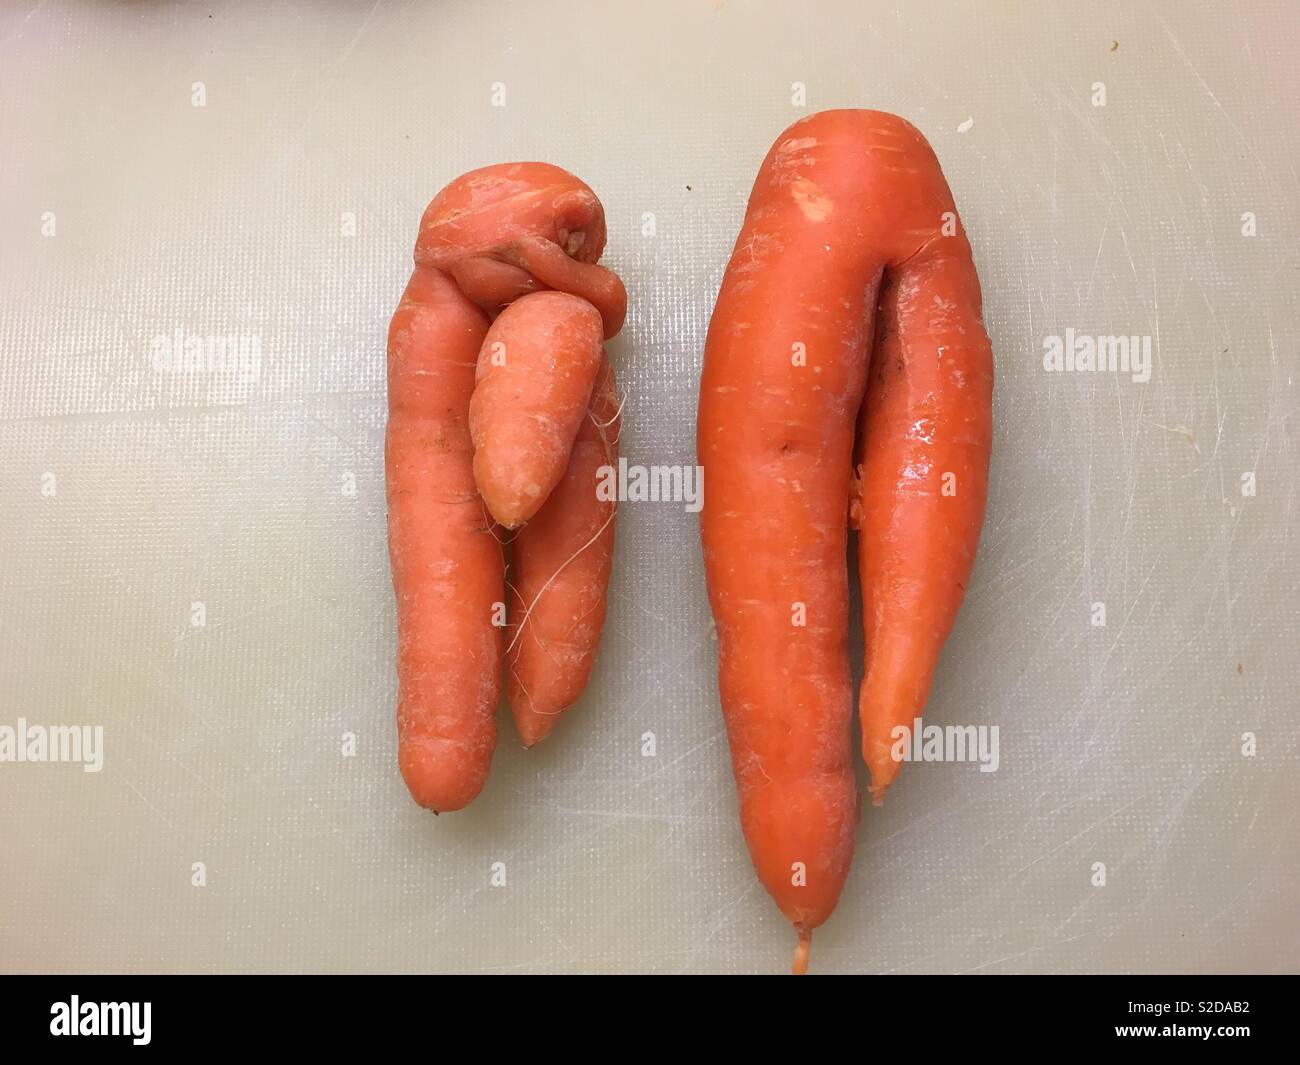 His and hers carrots. Stock Photo